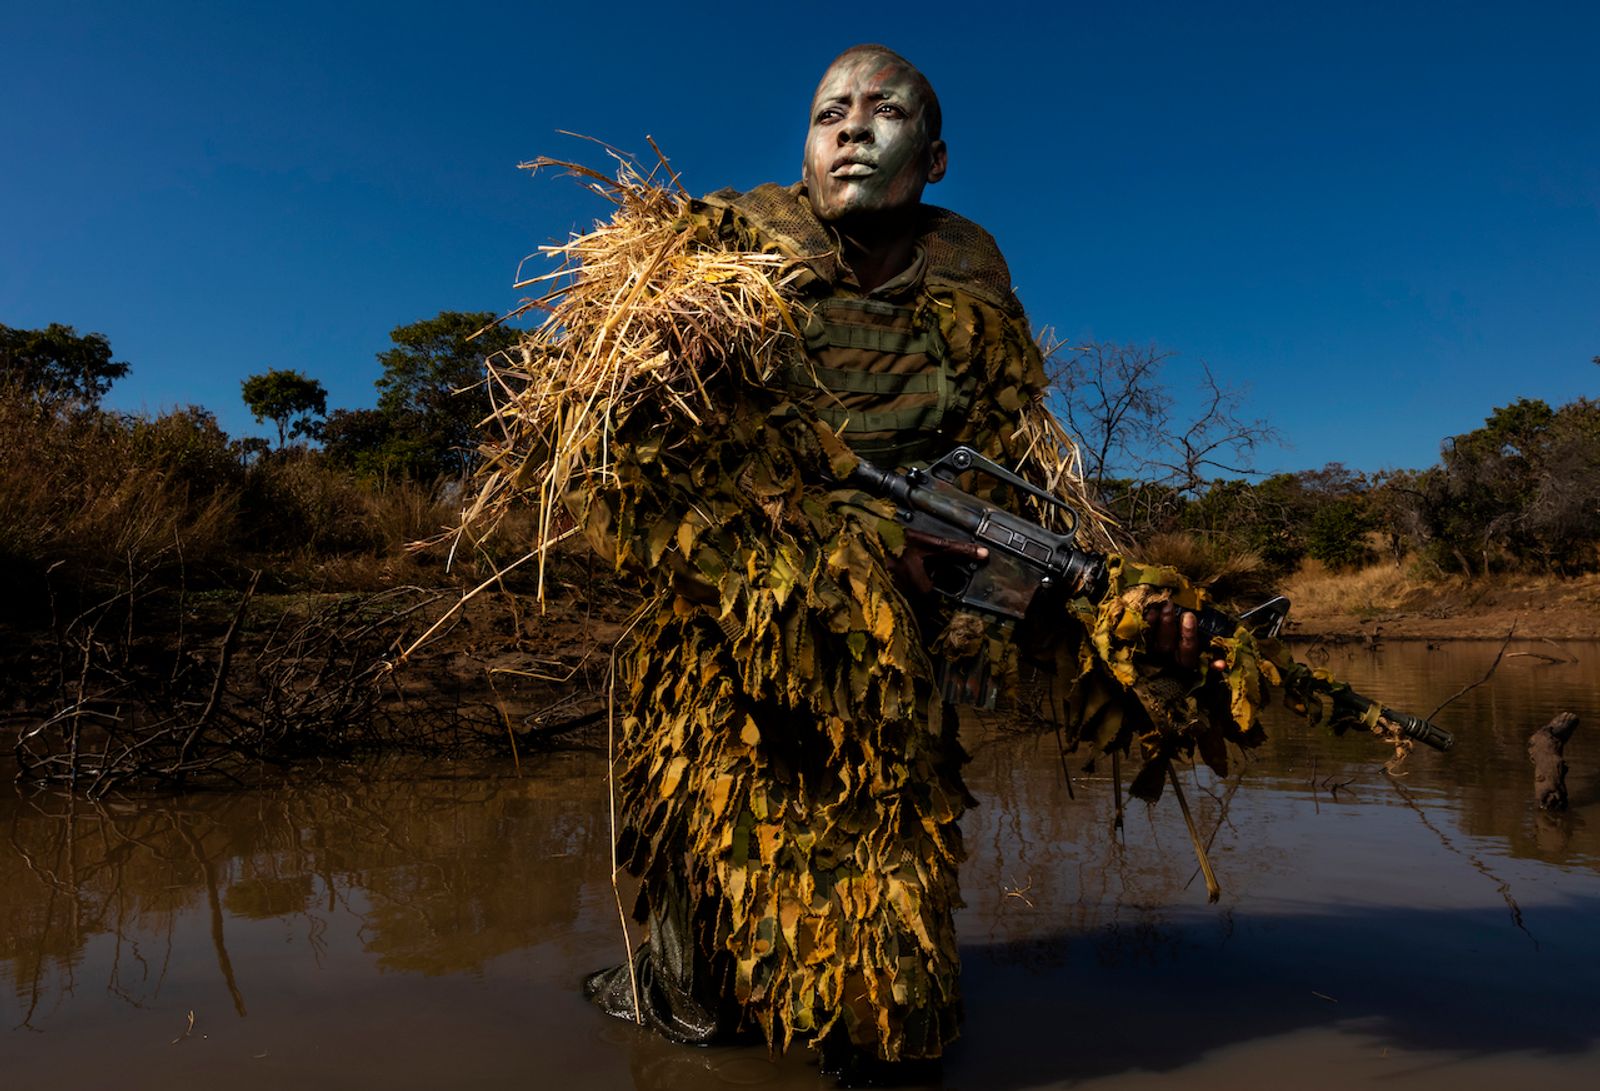 © Brent Stirton. Nominee for World Press Photo of the Year